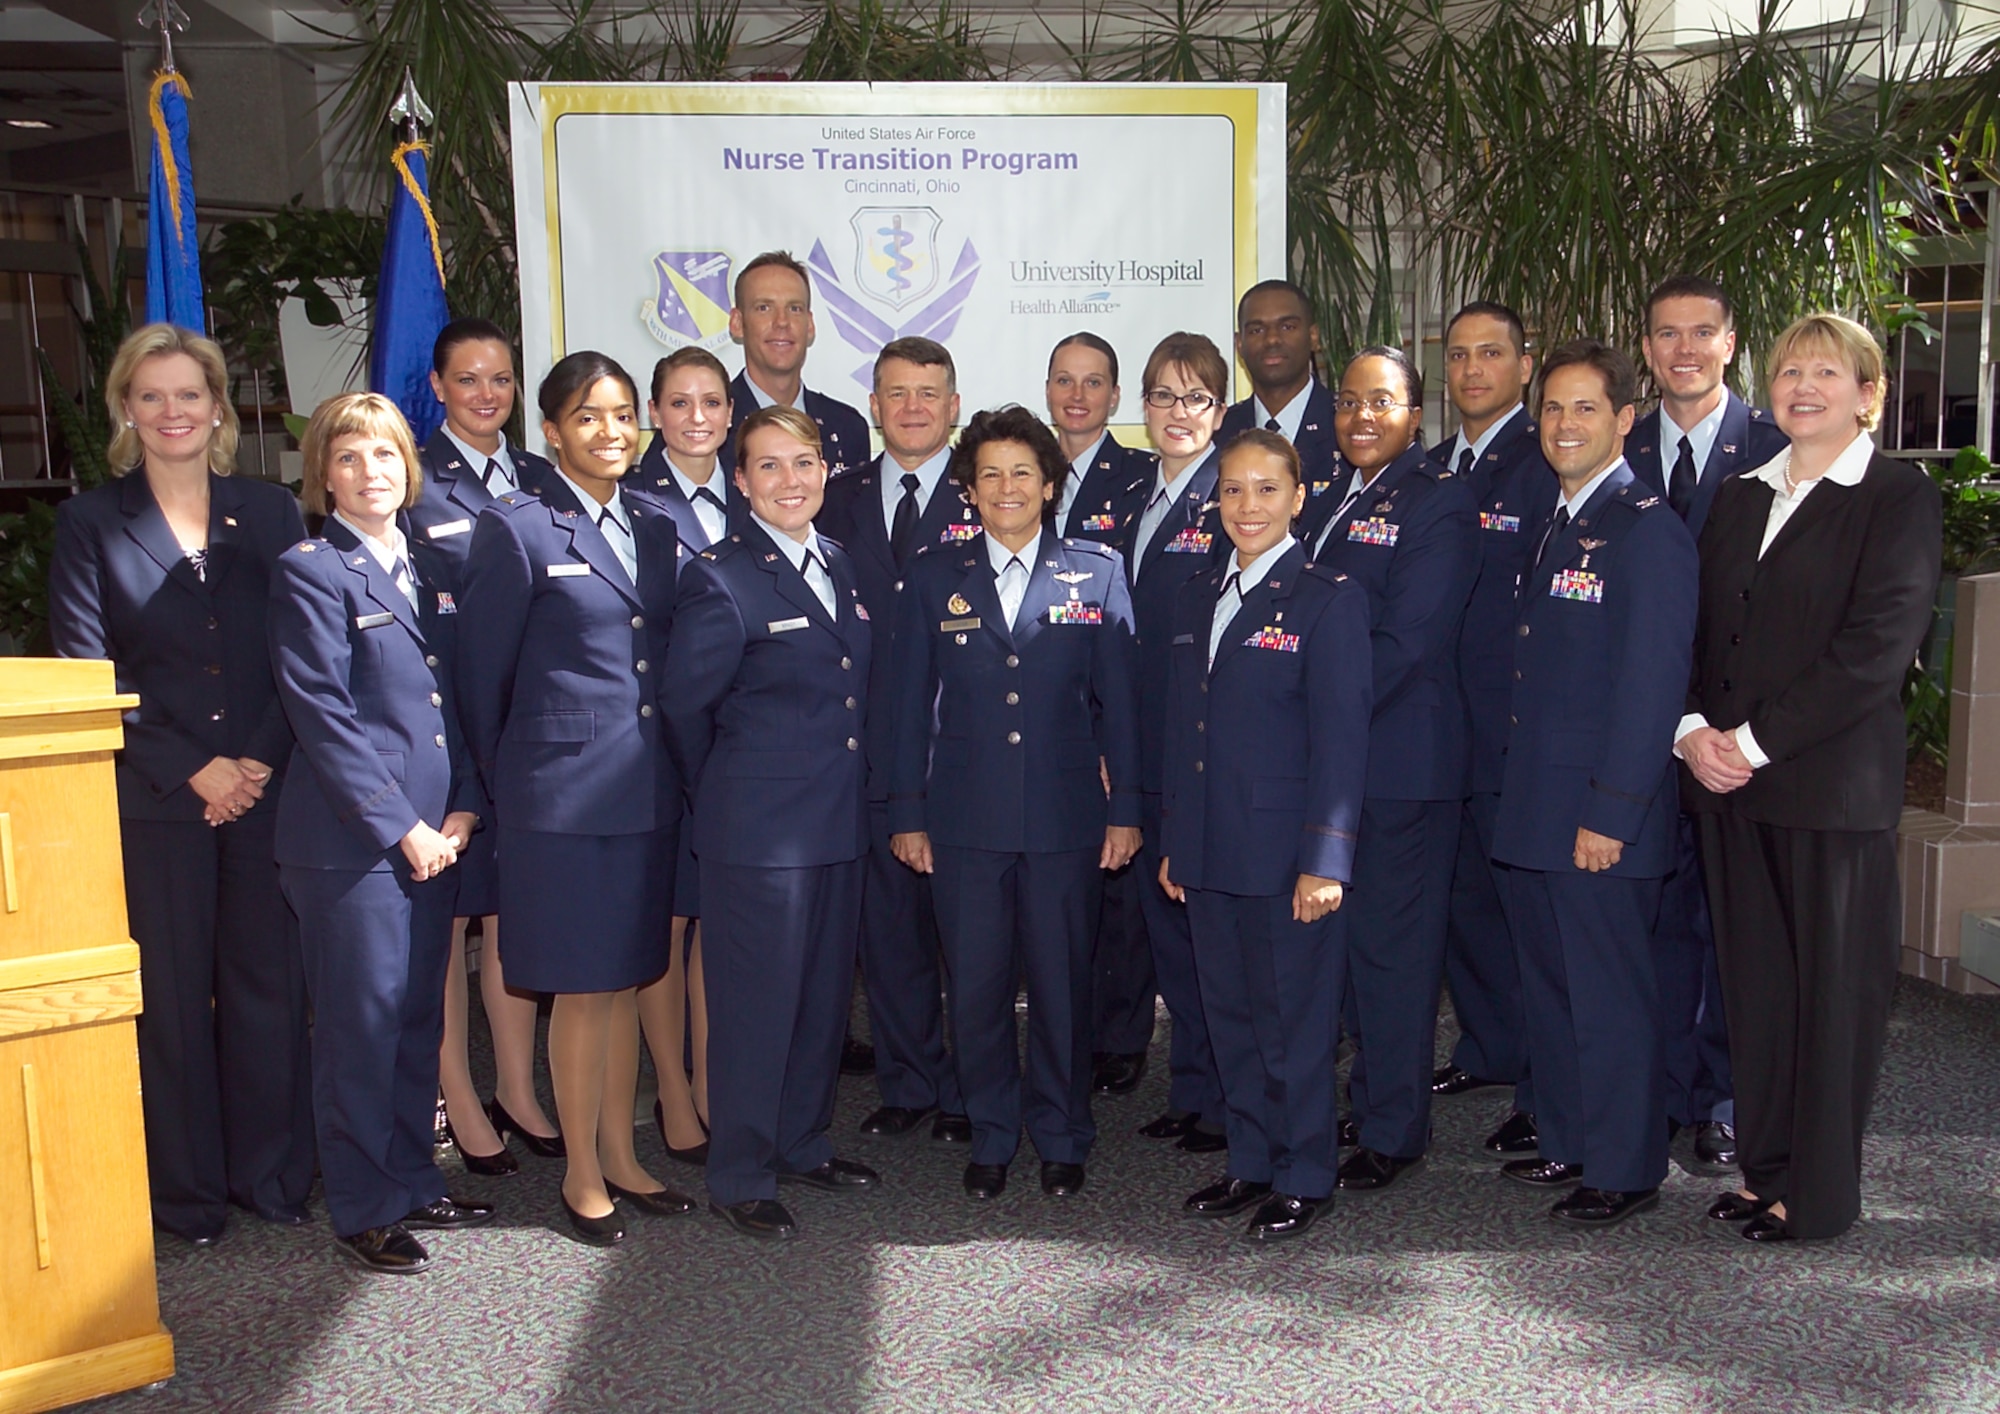 University Hospital Cincinnati and the U.S. Air Force inaugurated the Nurse Transition Program Oct. 7 to provide newly graduated registered nurses advanced clinical and deployment readiness training for service in the Air Force Nurse Corps.  Here Air Force and civilian dignitaries are joined by nurses comprising the first class of the Nurse Transition Program. (U.S. Air Force photo)